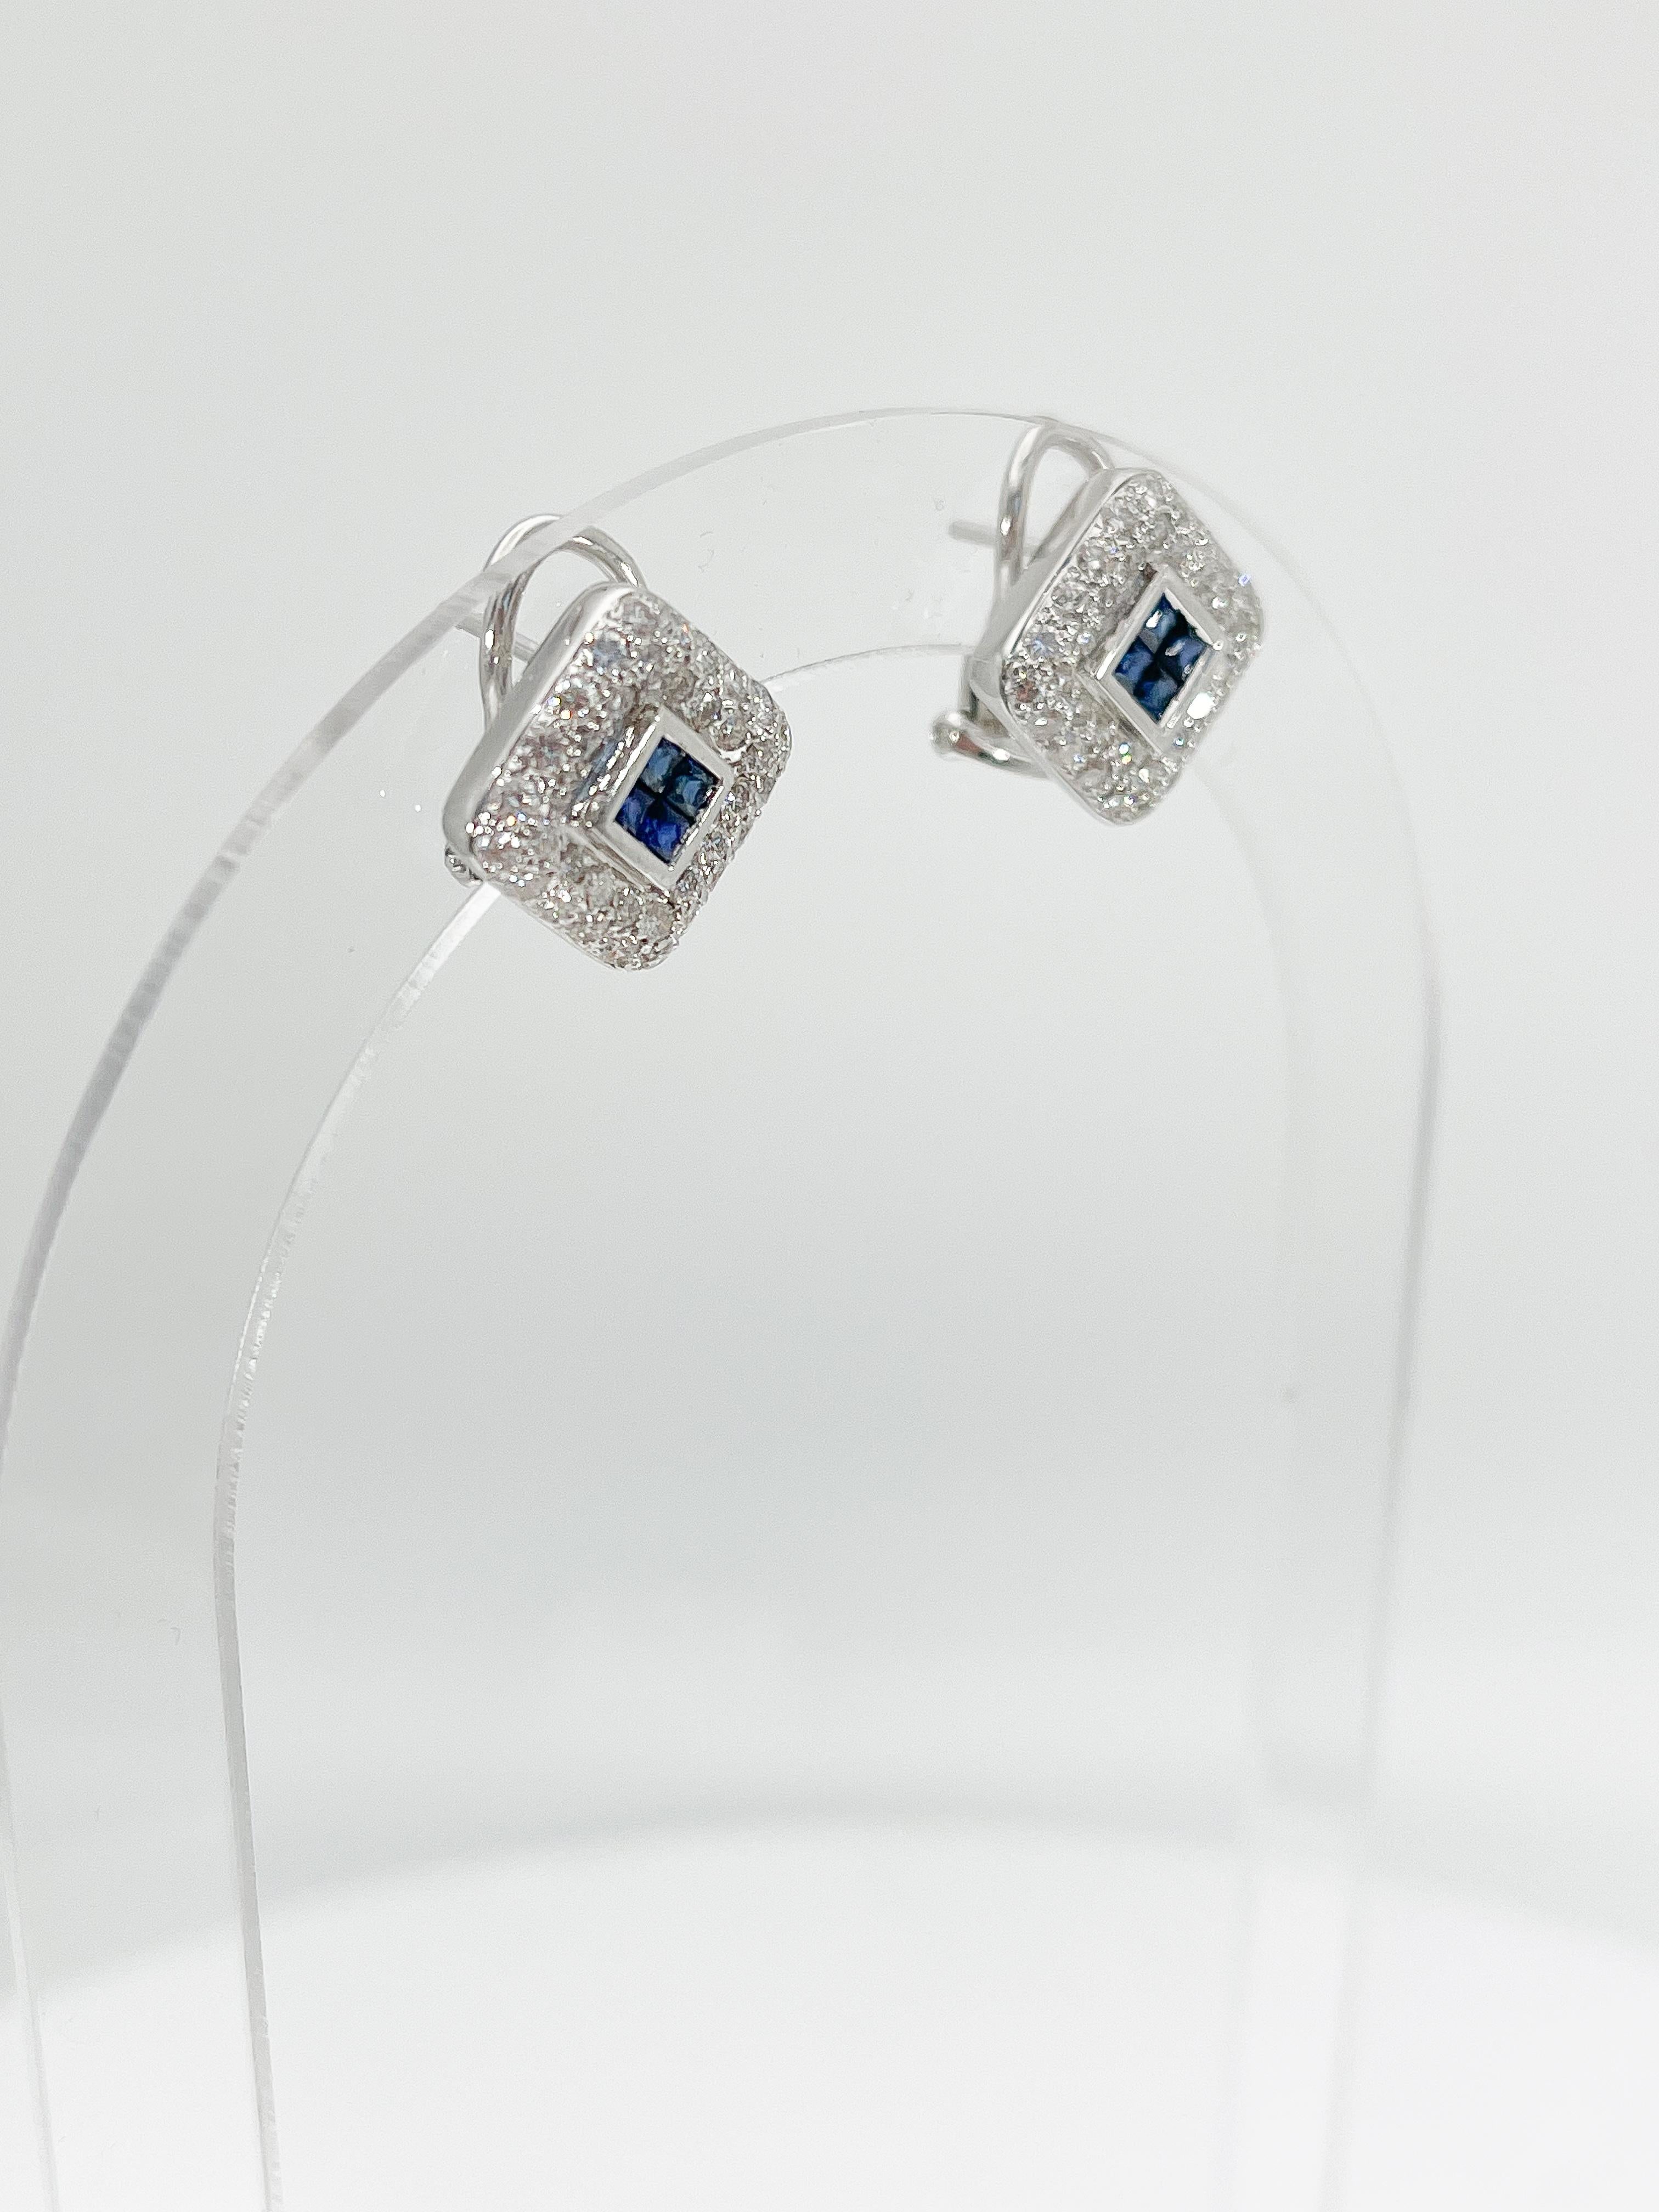 Princess Cut 18K White Gold 1 CTW Sapphire and 1 CTW Diamond Earrings For Sale